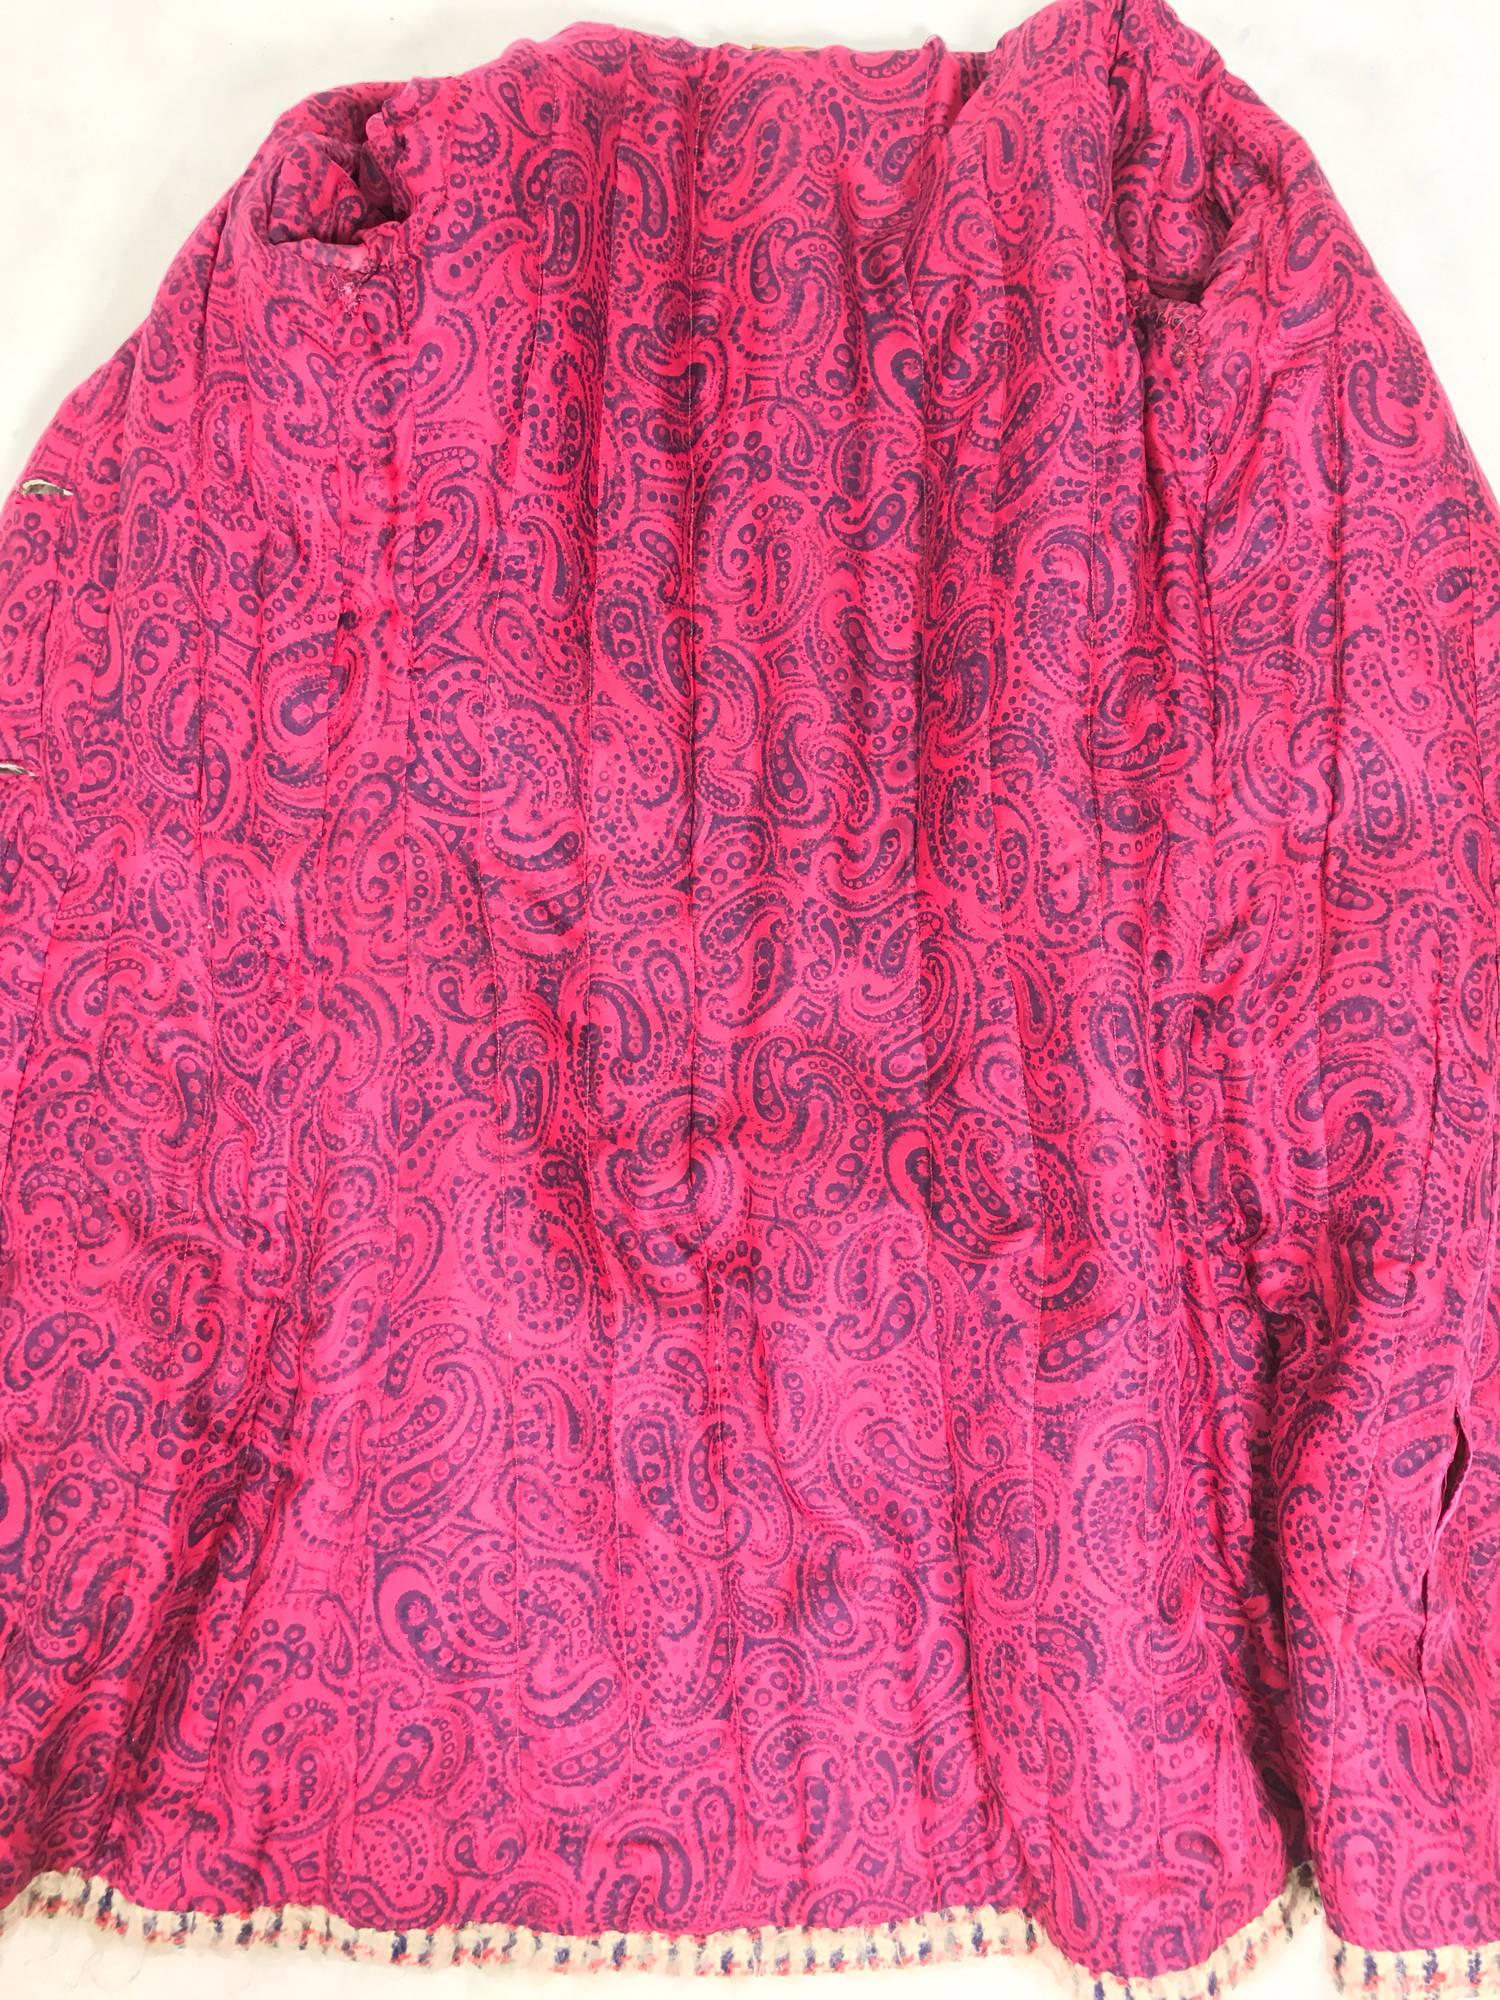 Vintage Chanel Haute Couture ribbon trim wool coat printed lining early 1960s 1